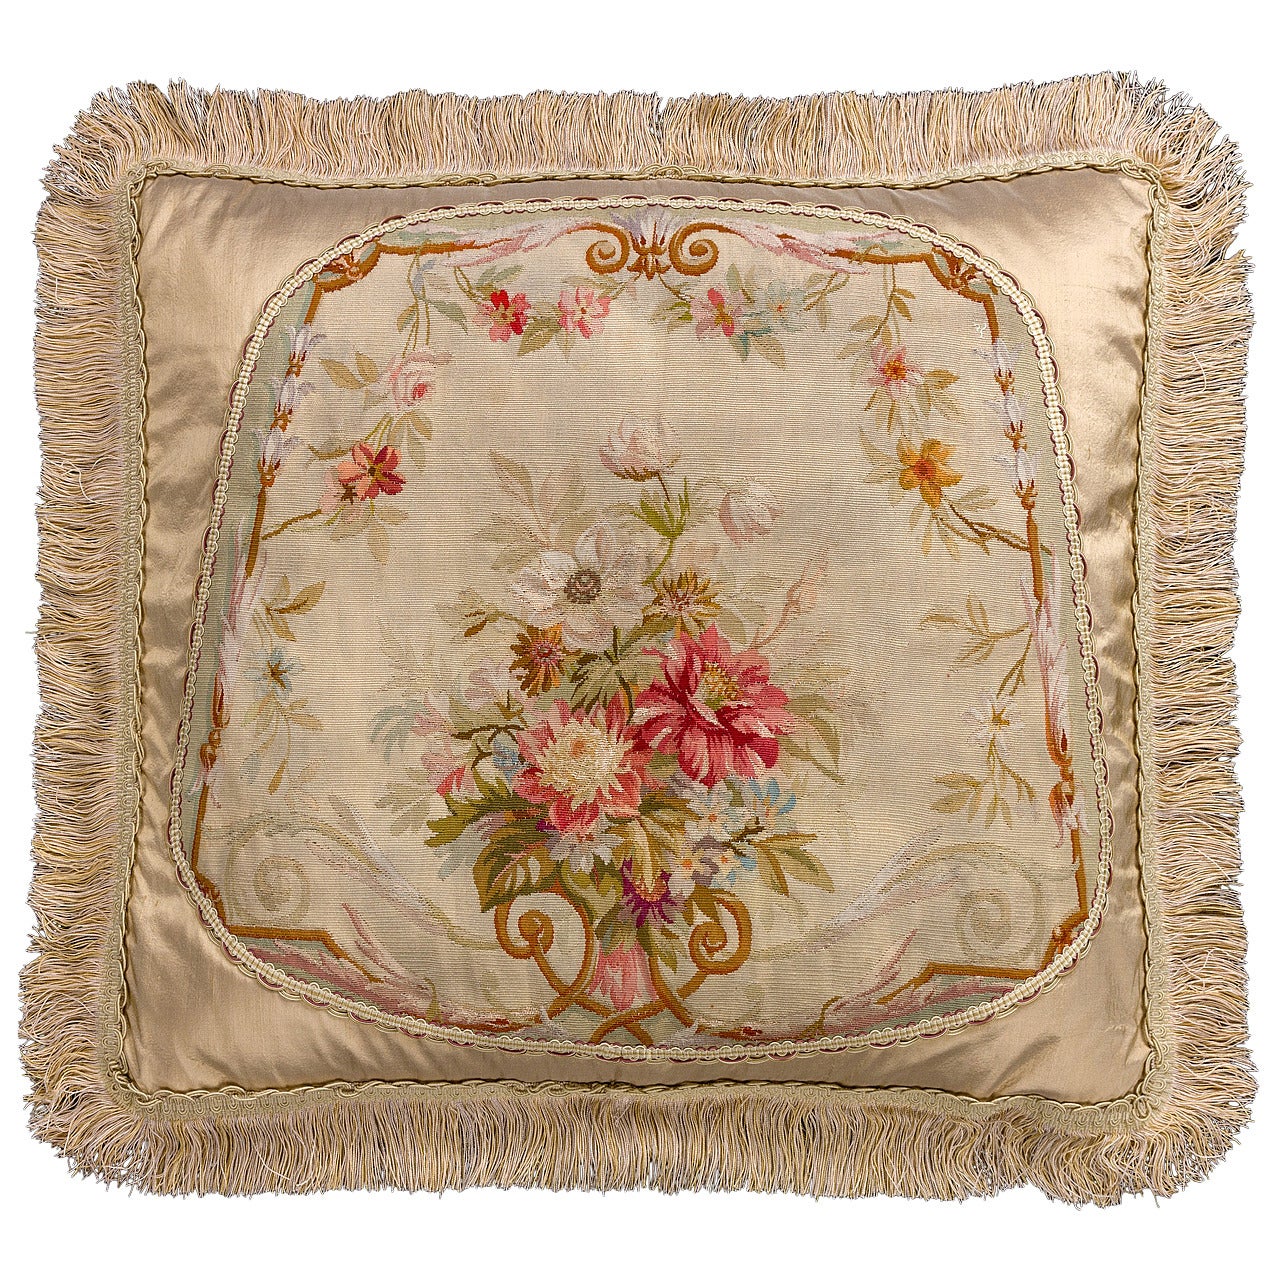 Cushion: 18th Century, Wool and Silk. Bouquet of Flowers